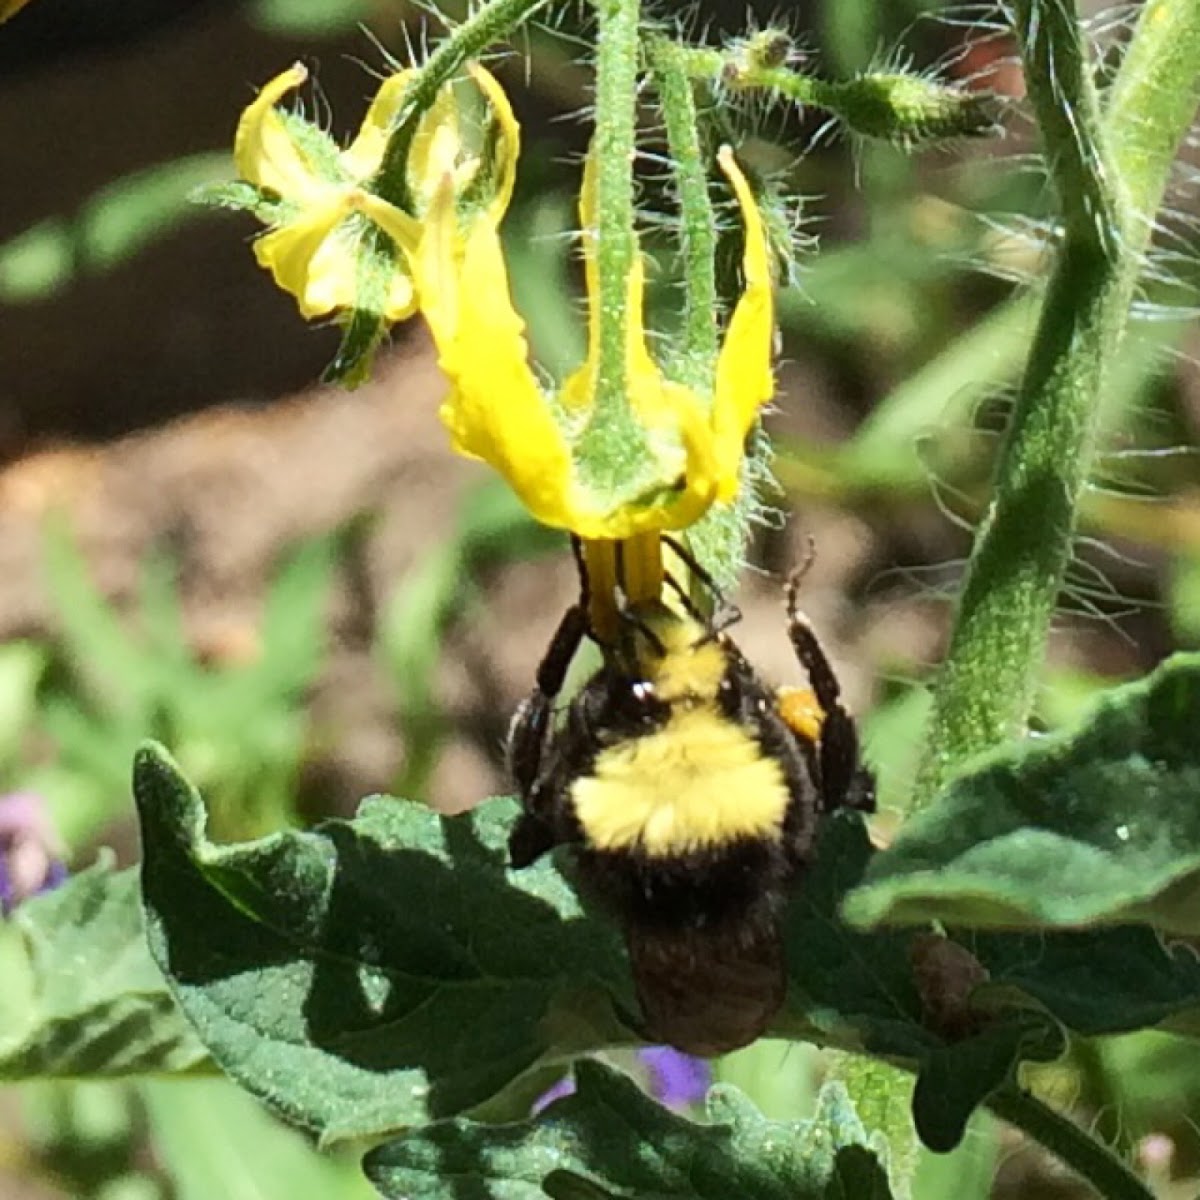 Black-notched bumblebee